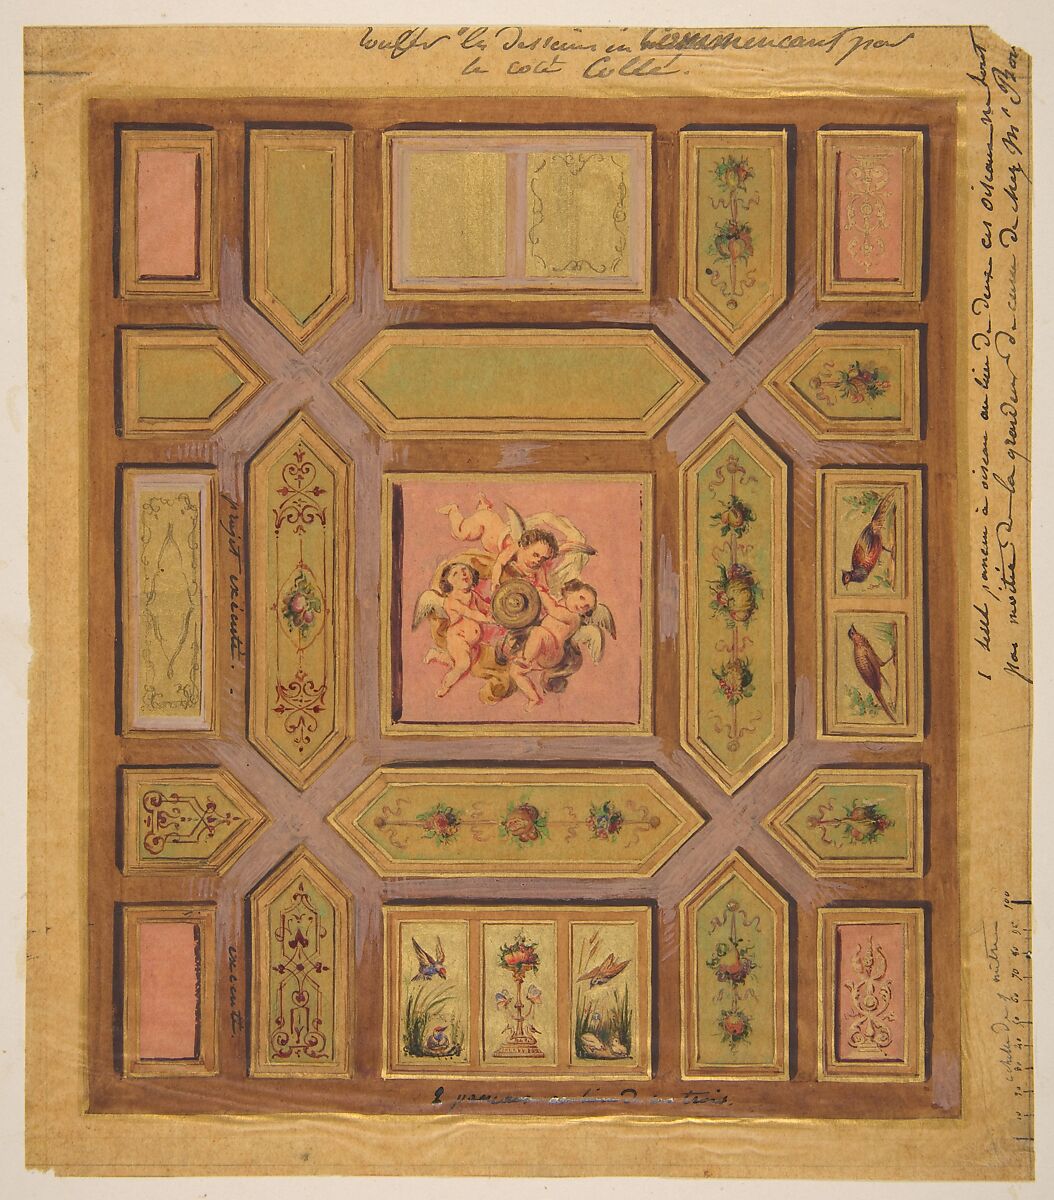 Design for a paneled ceiling painted with putti, birds, and floral motifs on tracing paper; mounted on wove paper, Jules-Edmond-Charles Lachaise (French, died 1897), pen and ink, watercolor, and gold paint 